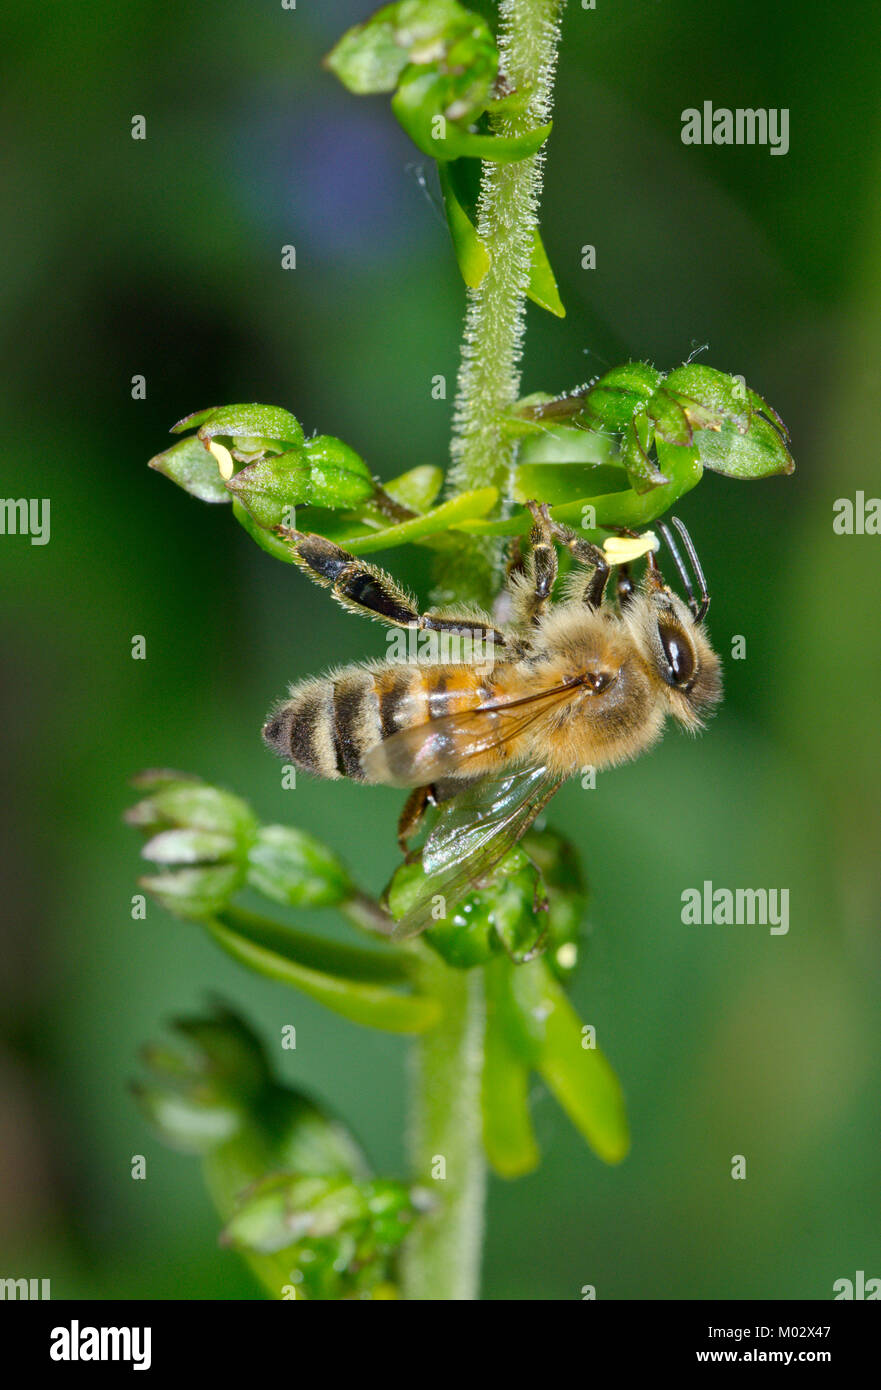 Twayblade Orchid (Neottia ovata) pollinated by Honey Bee with pollinia stuck to tongue. Sussex, UK Stock Photo